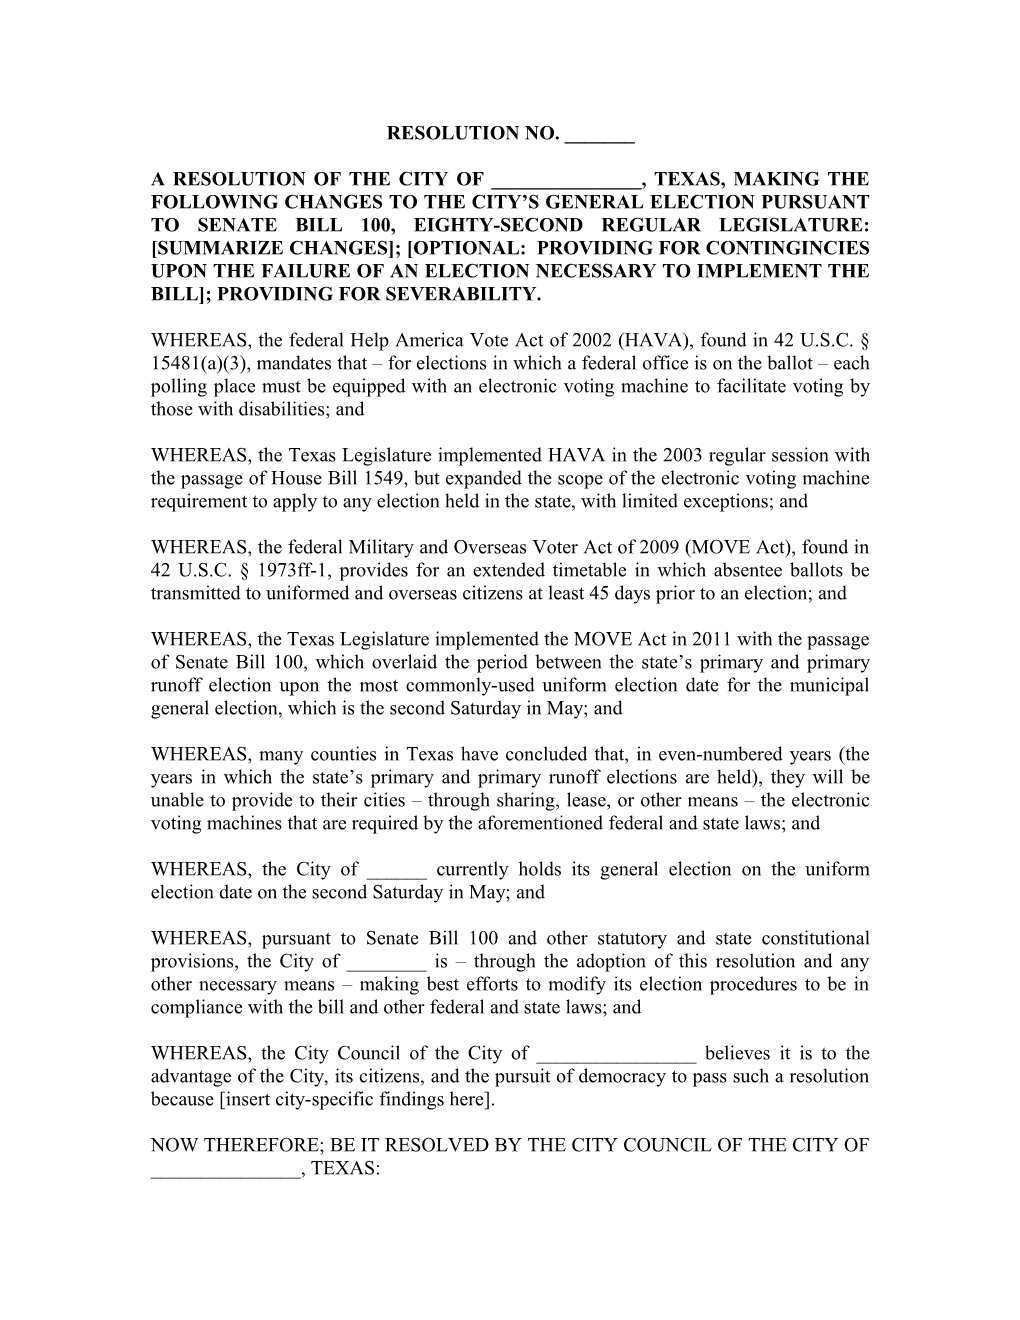 A Resolution of the City of ______, Texas, Making the Following Changes to the City S